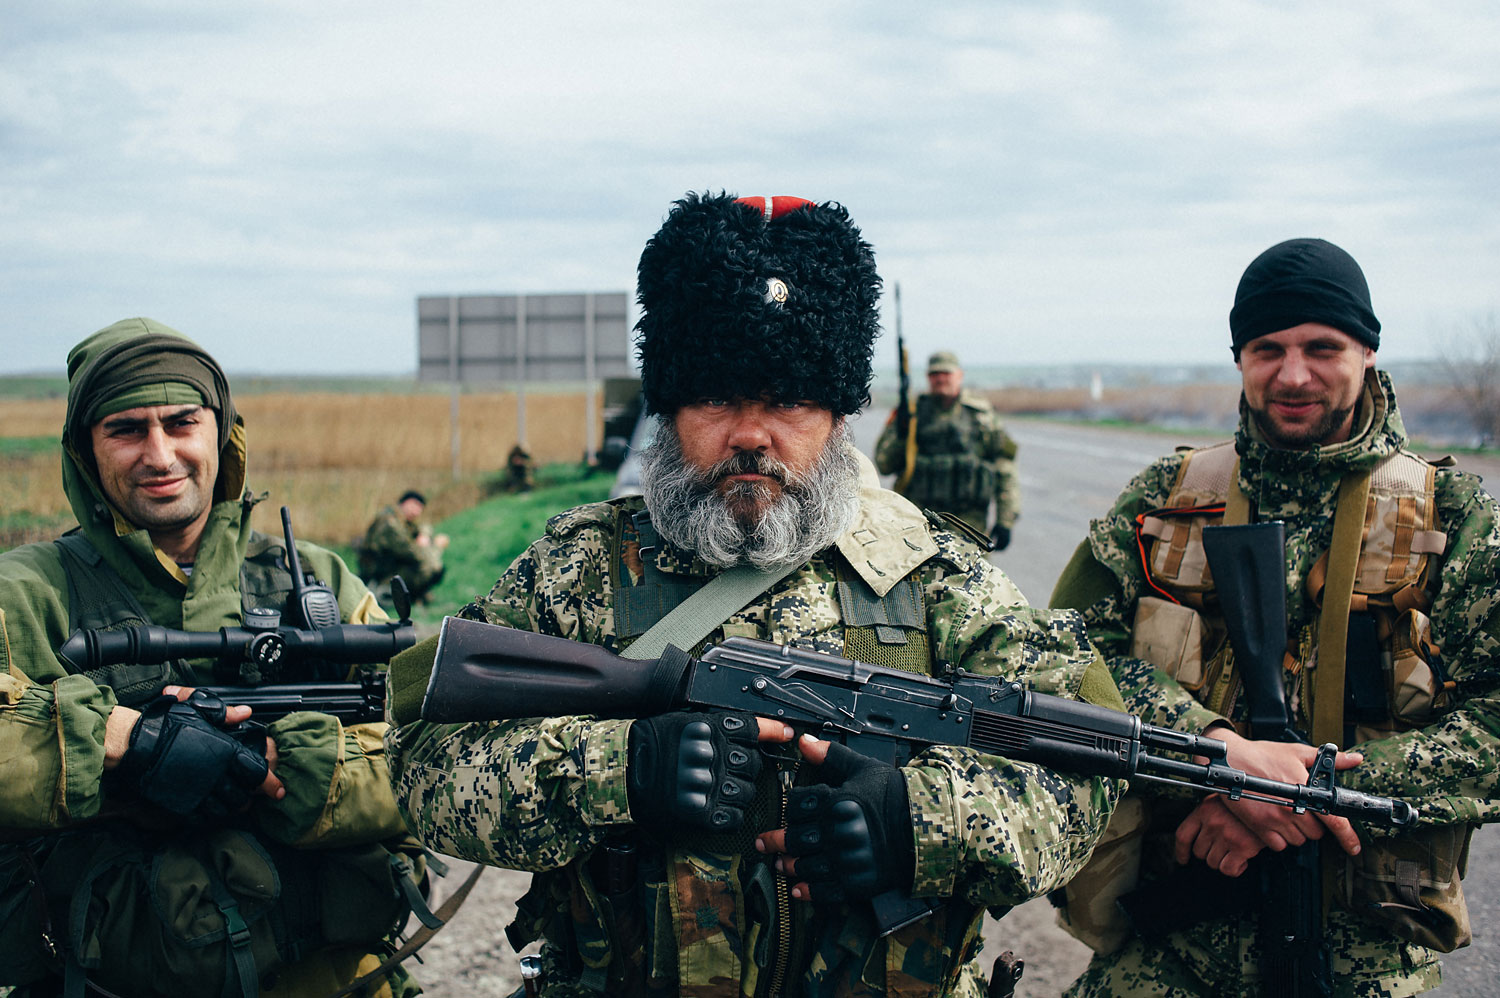 Alexander Mozhaev, a pro-Russian separatist whose photograph has appeared in numerous publications in recent days and who says he is not employed by the Russian state, stands with fellow separatists in the town of Slavyansk on April 20.